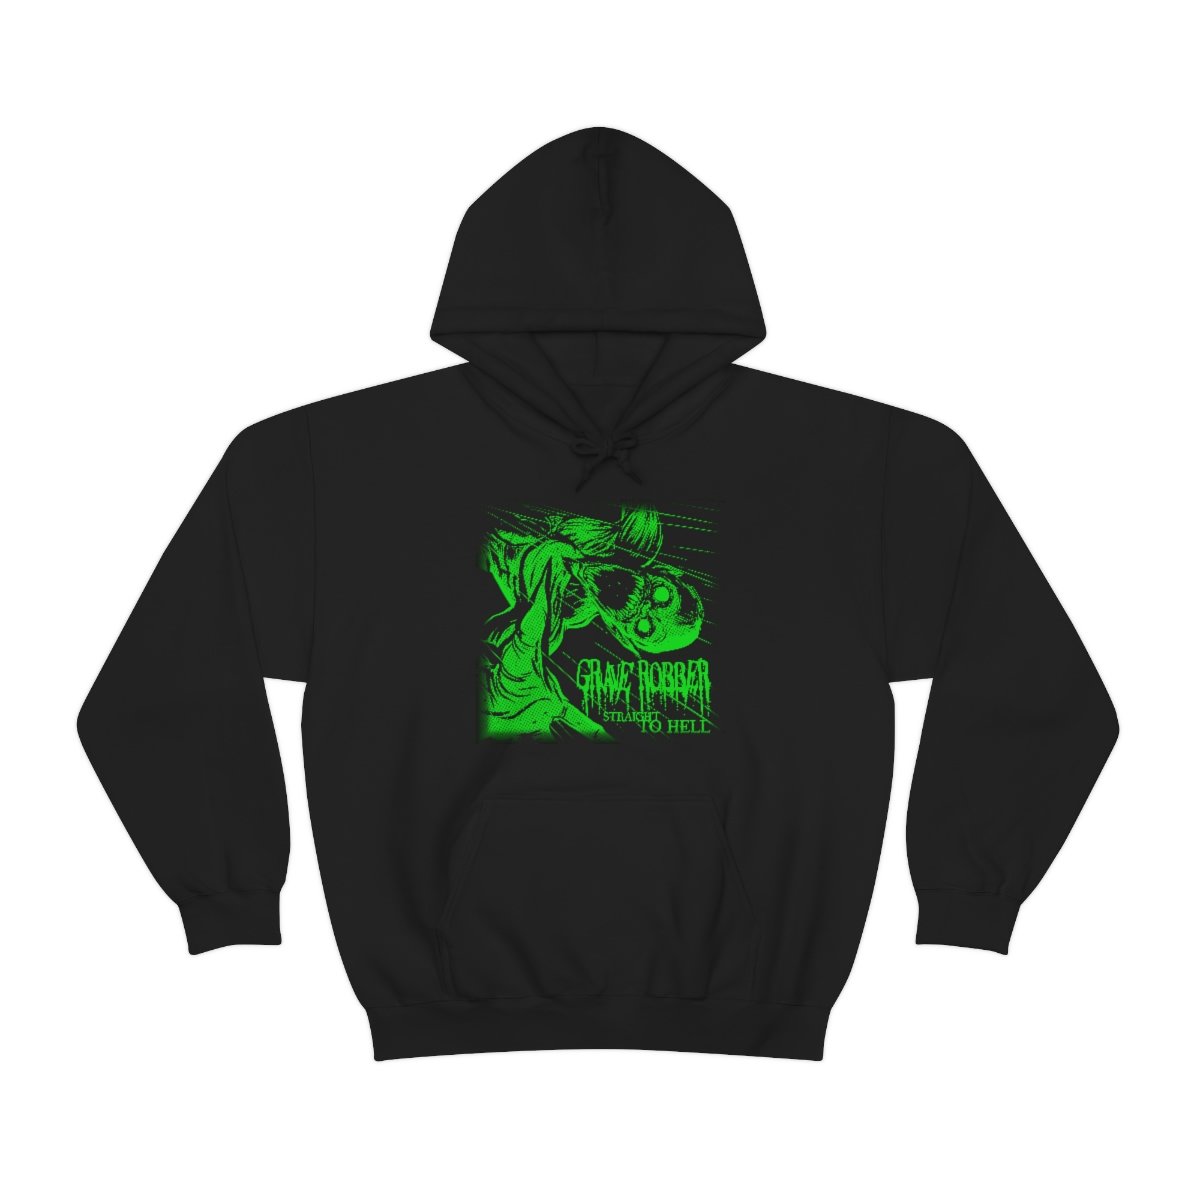 Grave Robber – Straight to Hell (Green) Pullover Hooded Sweatshirt